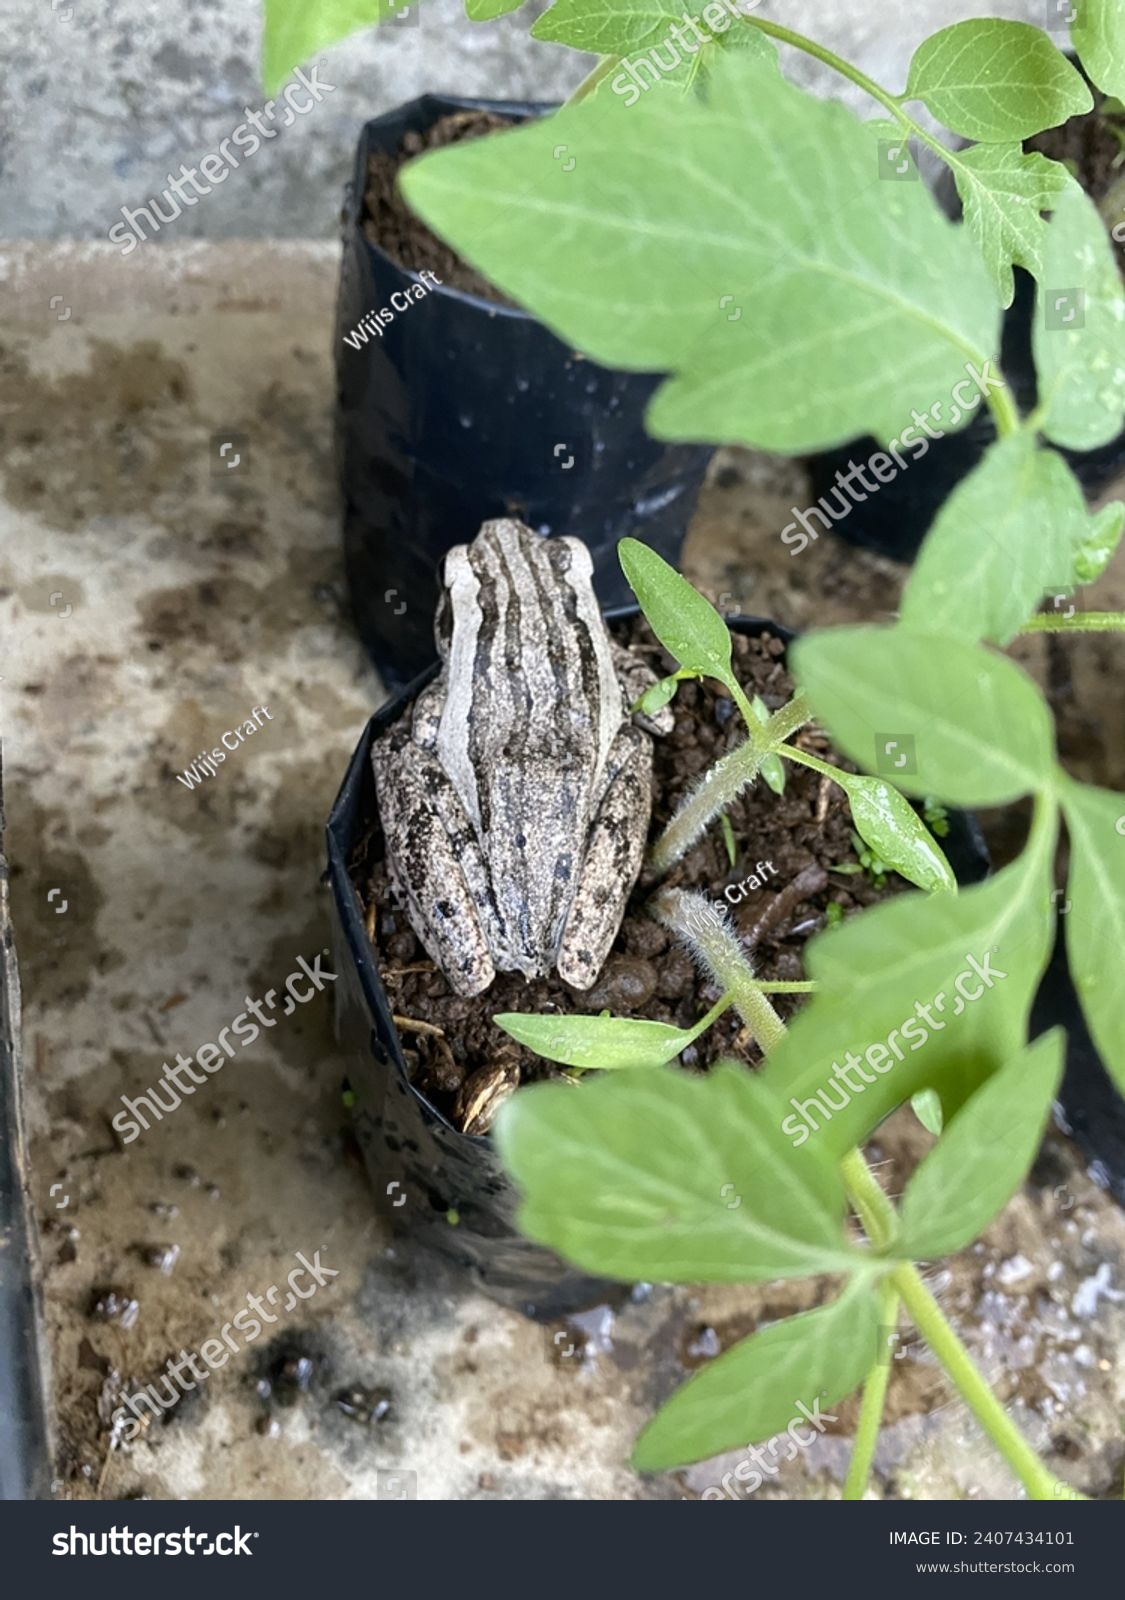 Striped Marsh Frog. The striped marsh frog or brown-striped frog (Limnodynastes peronii) is a predominantly aquatic frog native to coastal Eastern Australia. It is a common species in urban habitats. #2407434101